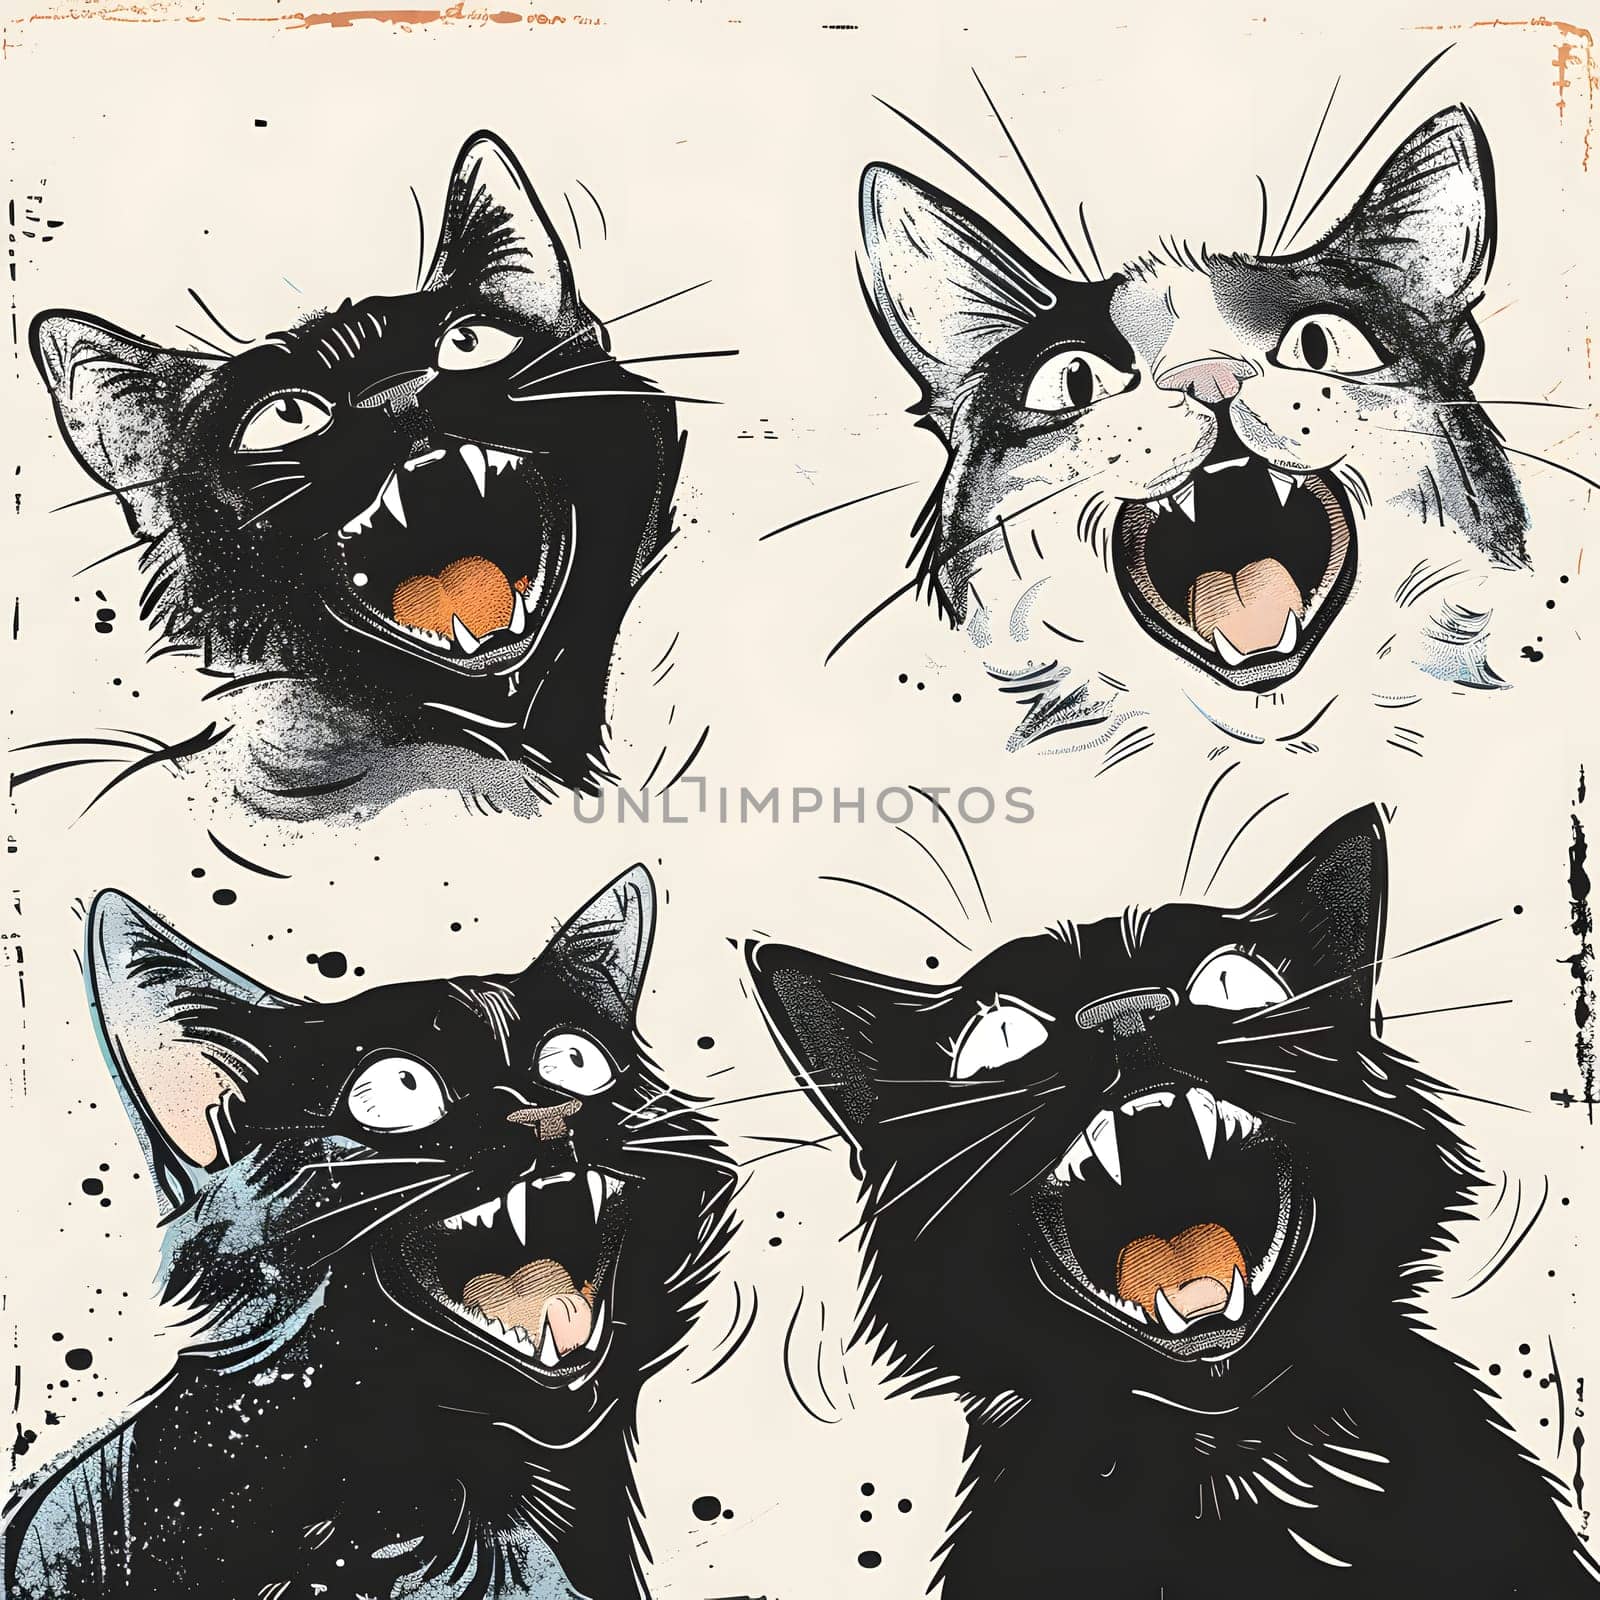 Four Carnivore Vertebrate Felidae Mammal Cats with open mouths in art painting by Nadtochiy